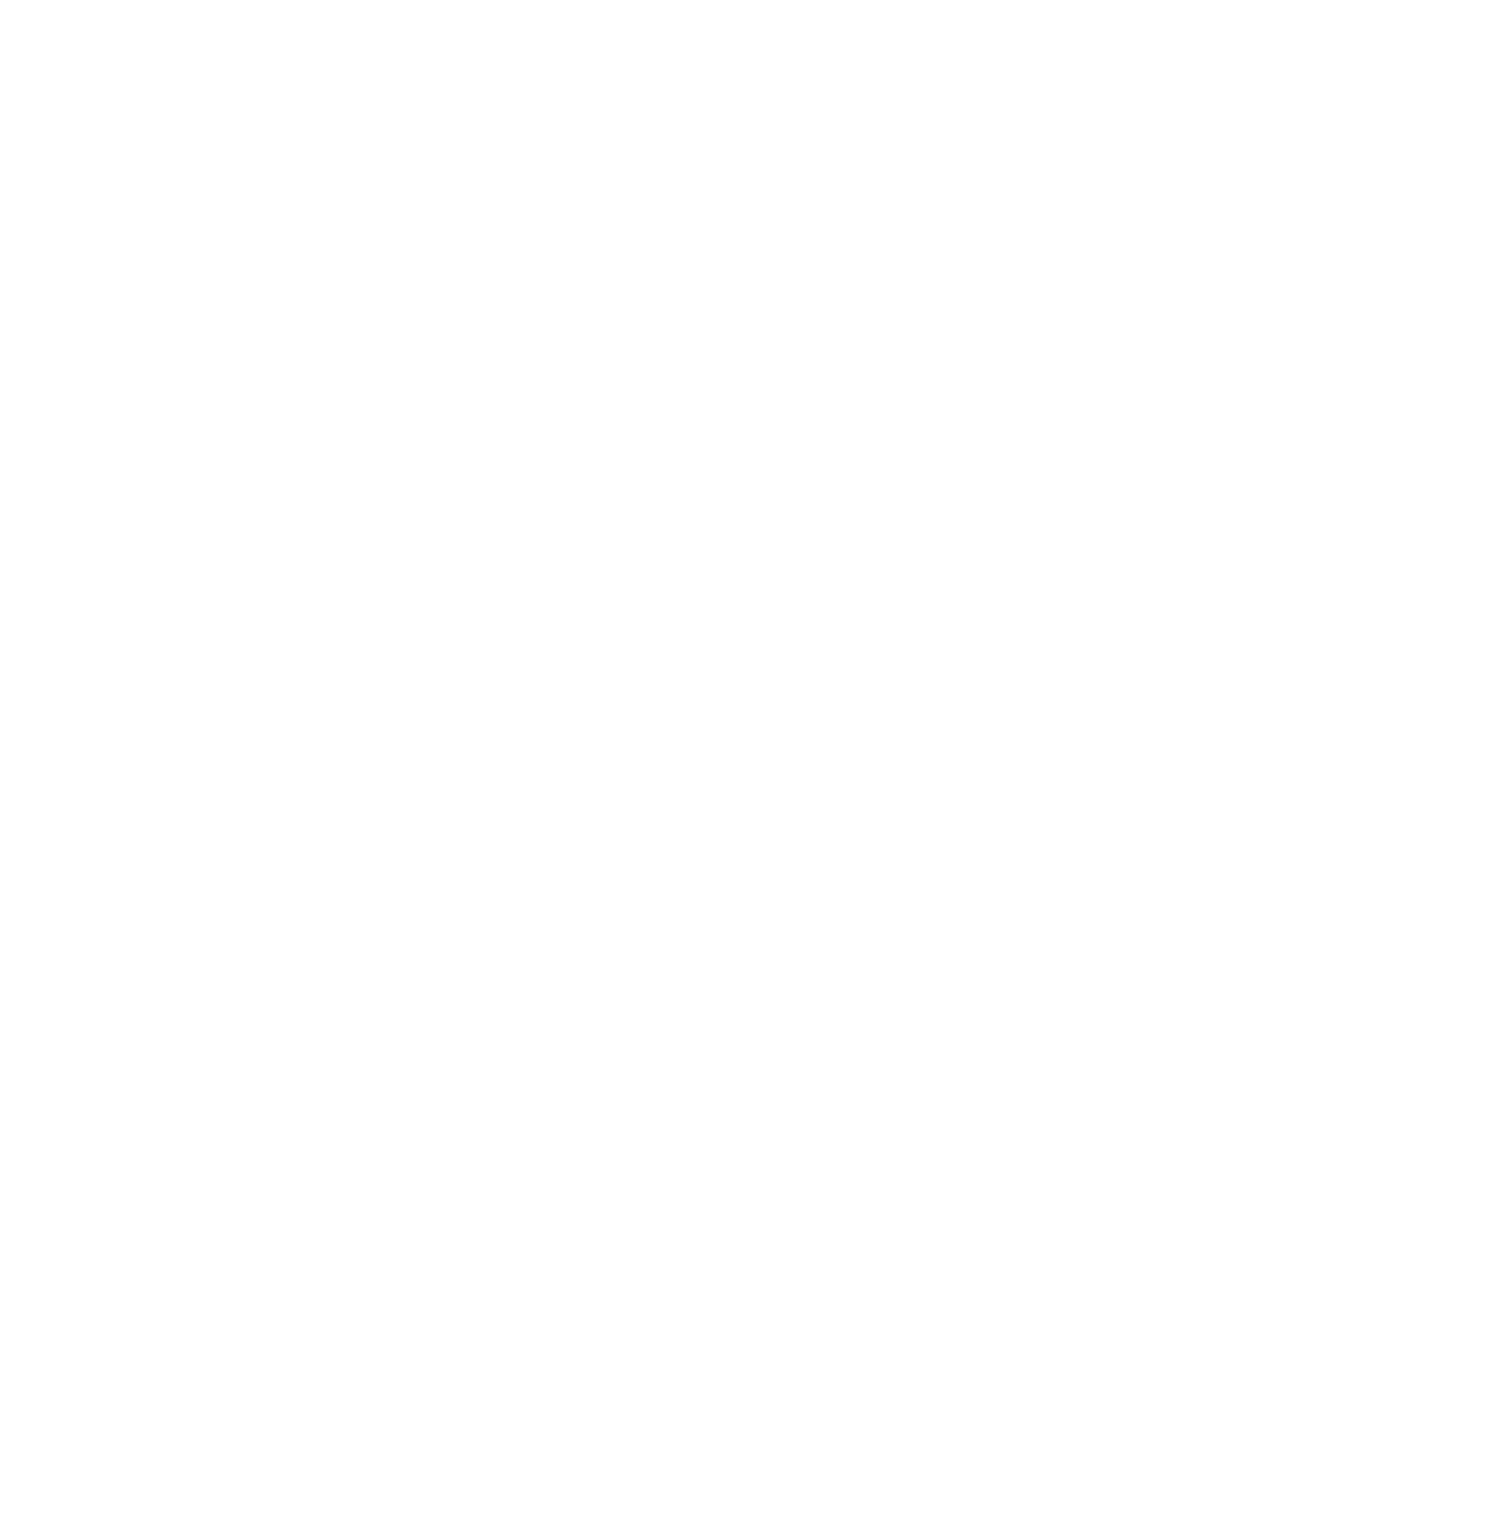 Collins Carpentry and Remodeling